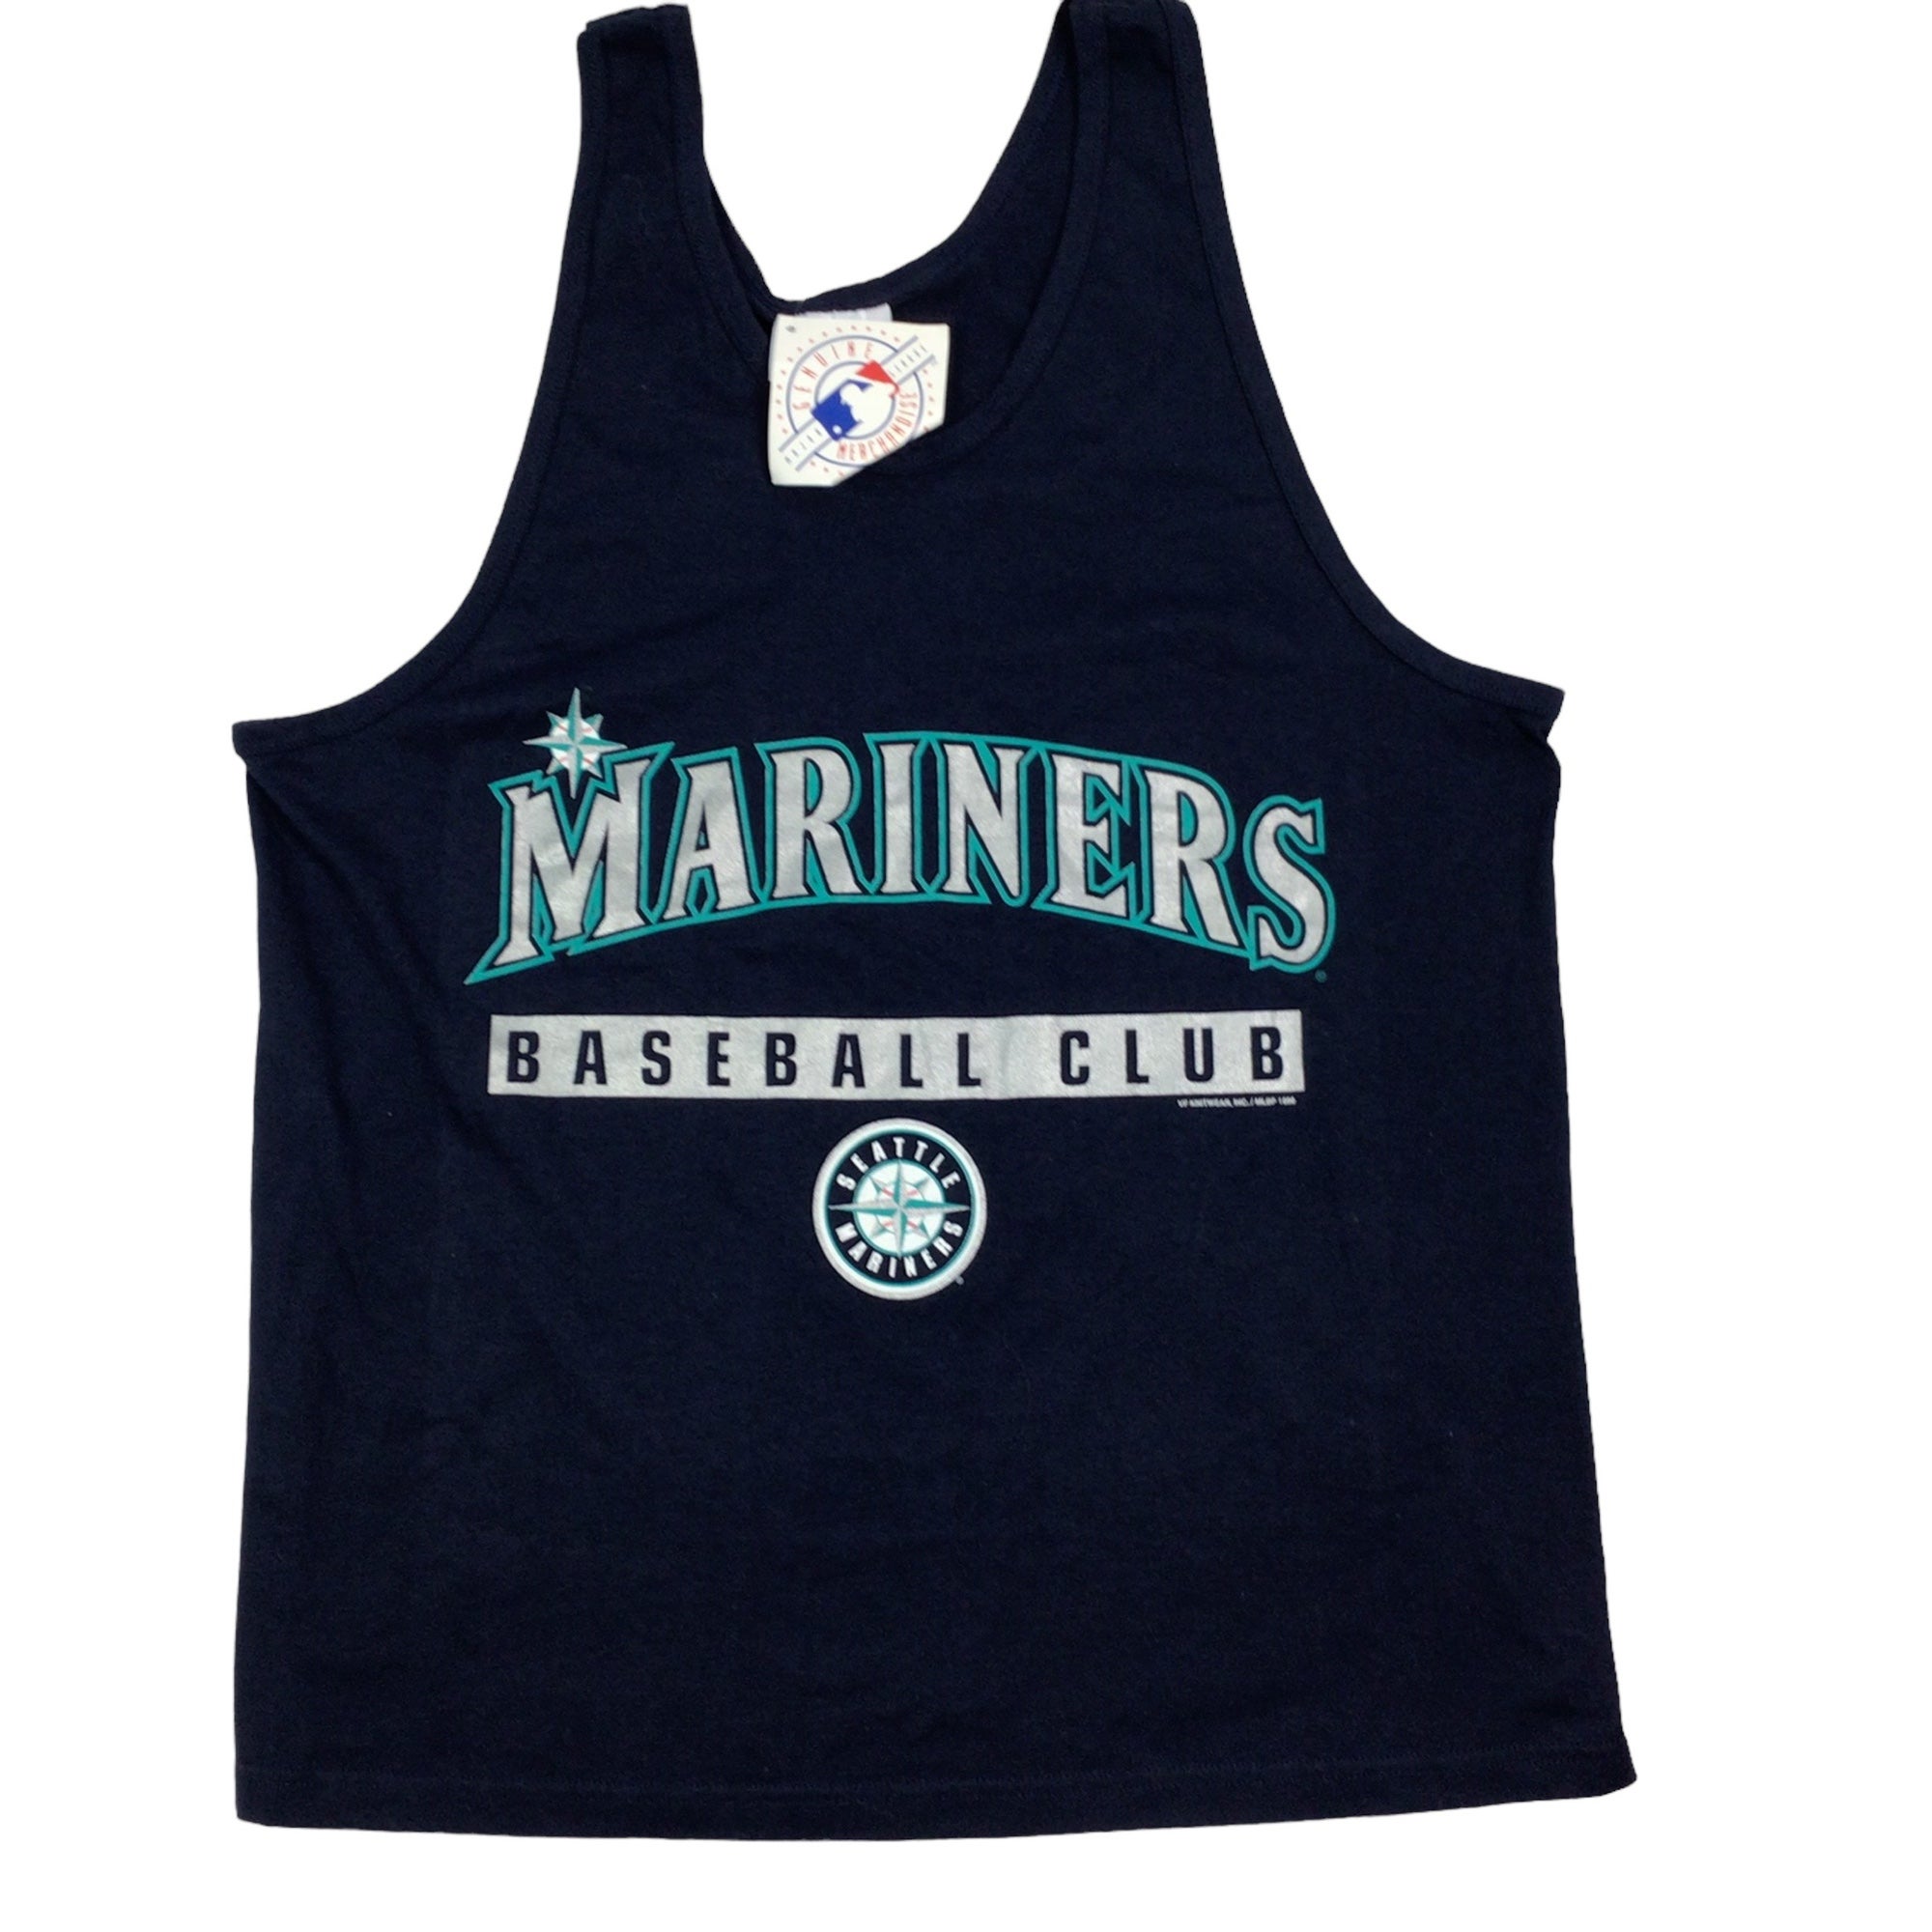 Vintage 1999, Seattle Mariners MLB tank top. Made in the USA